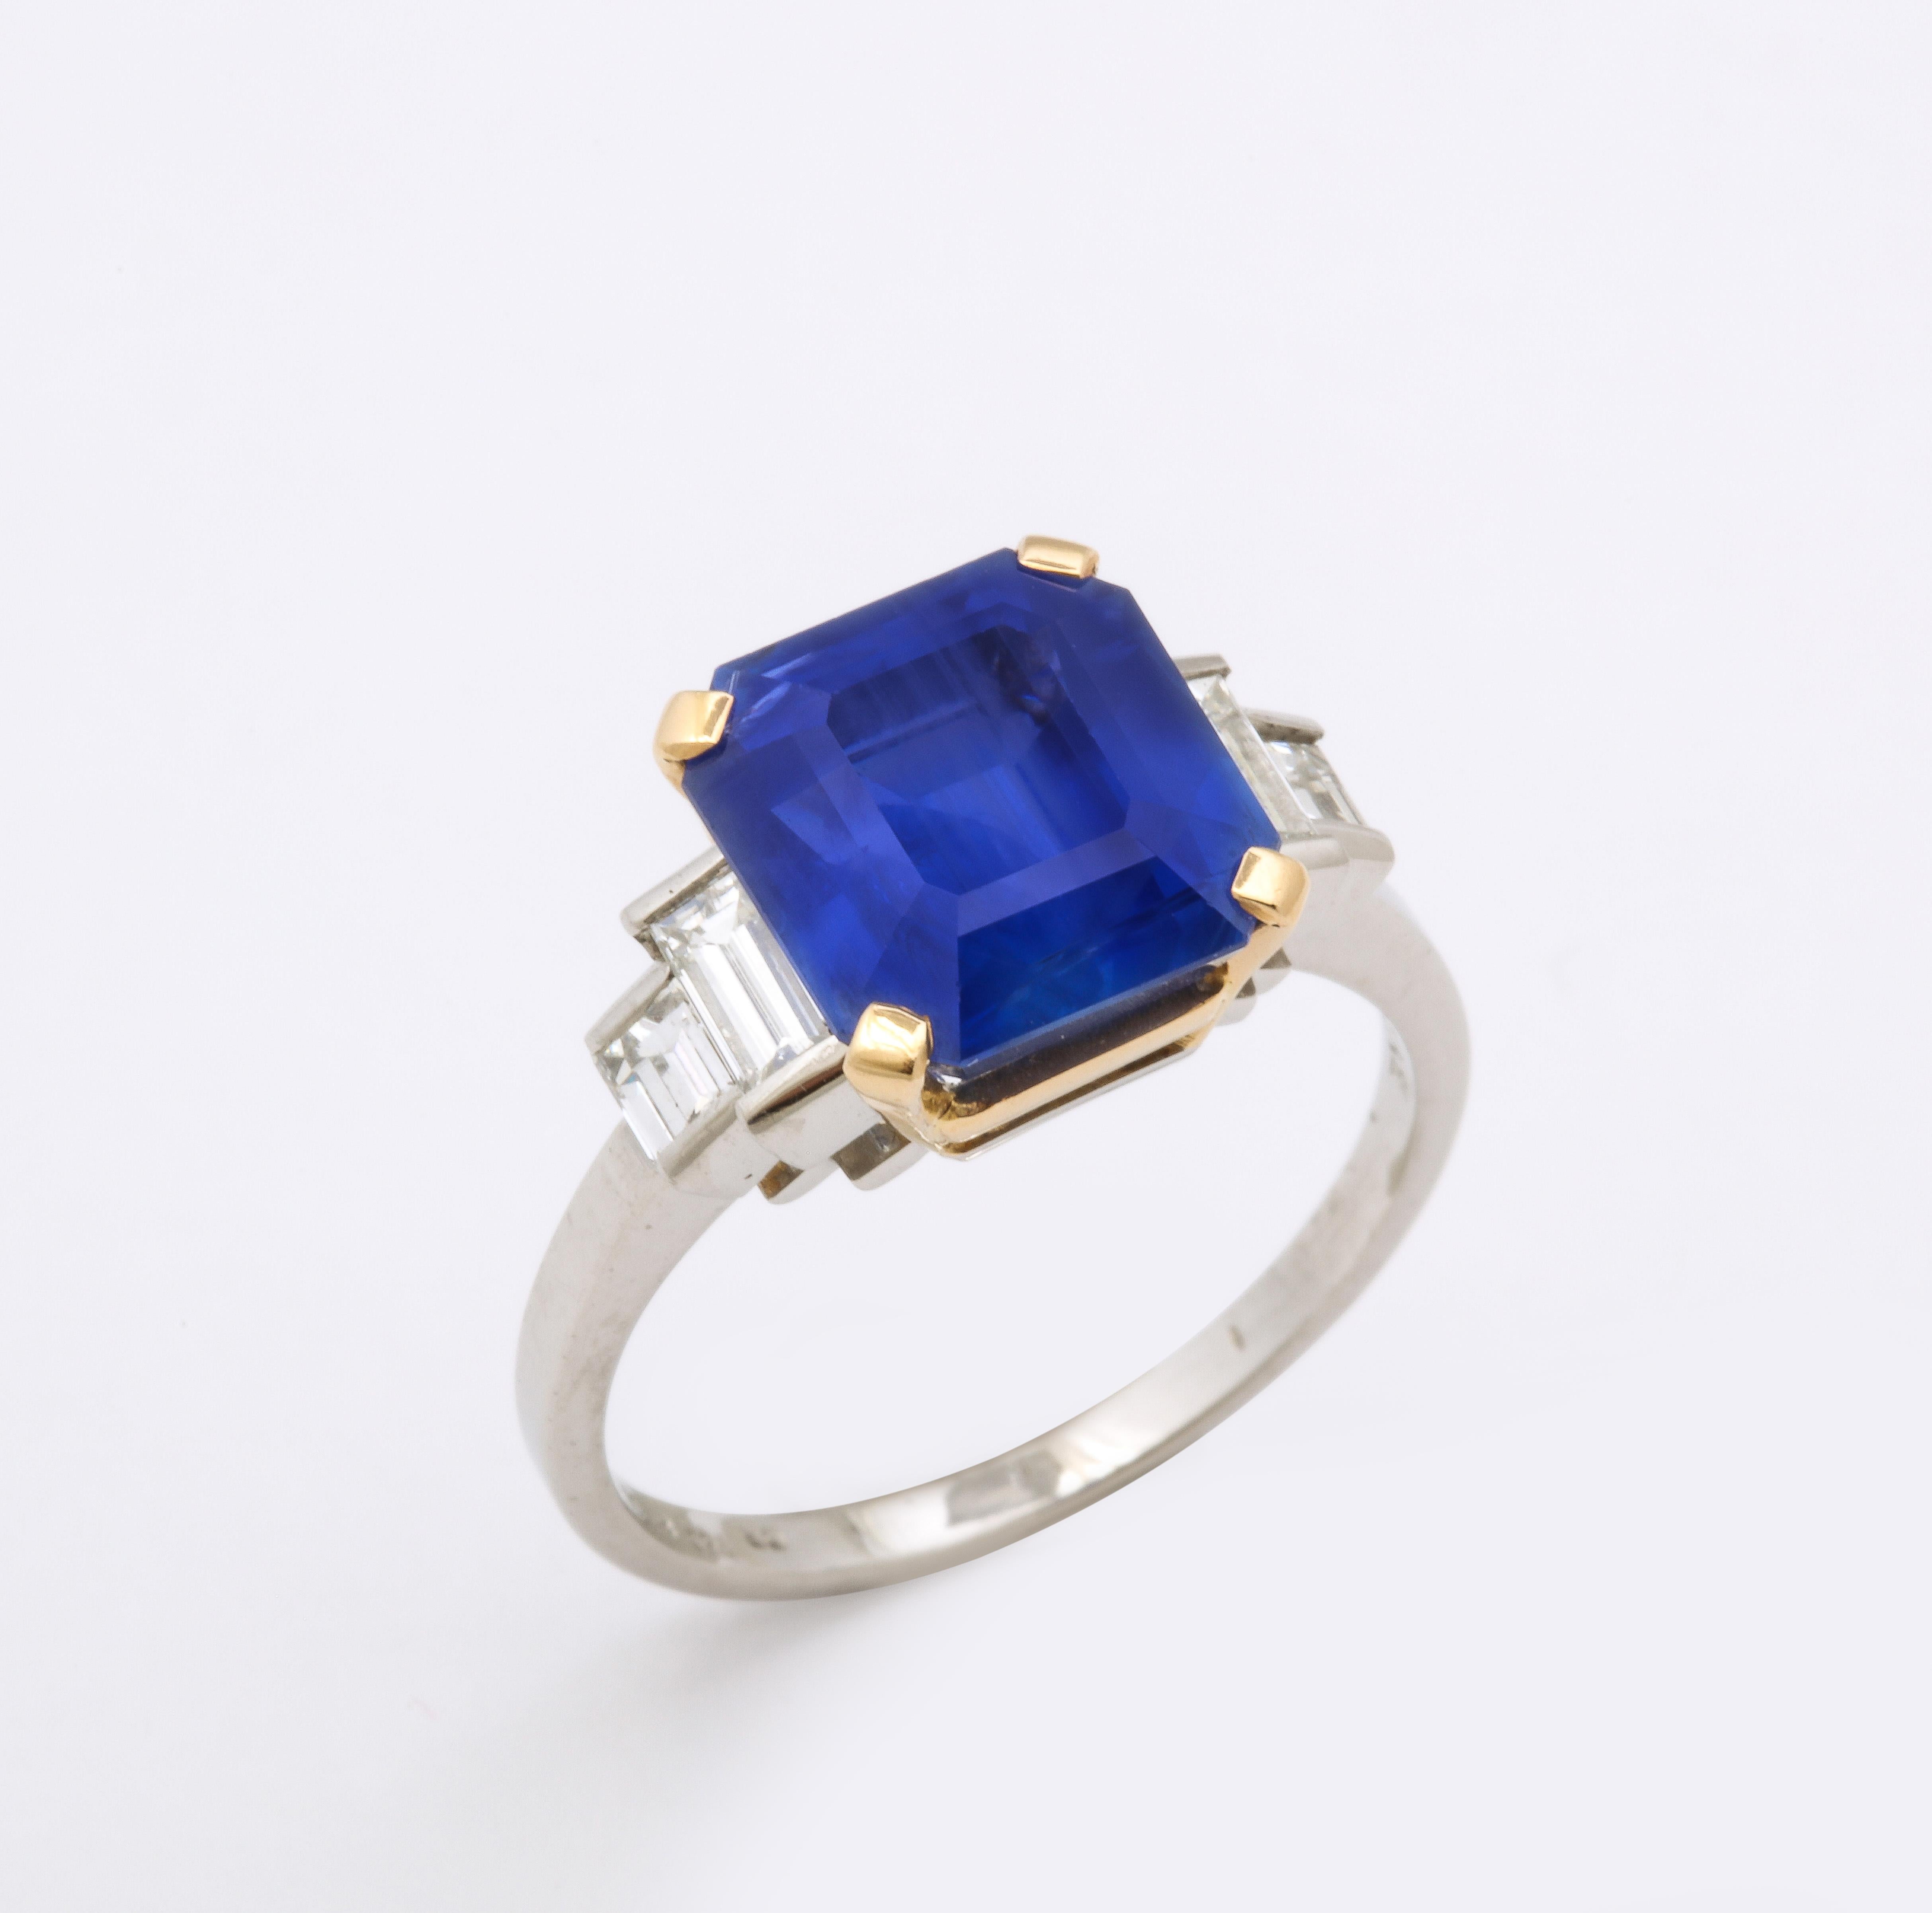 Bulgari Ceylon No Heat Sapphire and Diamond Ring in platinum and 18ct gold. Claw set with an emerald cut sapphire of 6.54 carats, accented by pairs of baguette cut diamonds. Signed Bvlgari. French import assay marks. Sapphire is of Ceylon (Sri